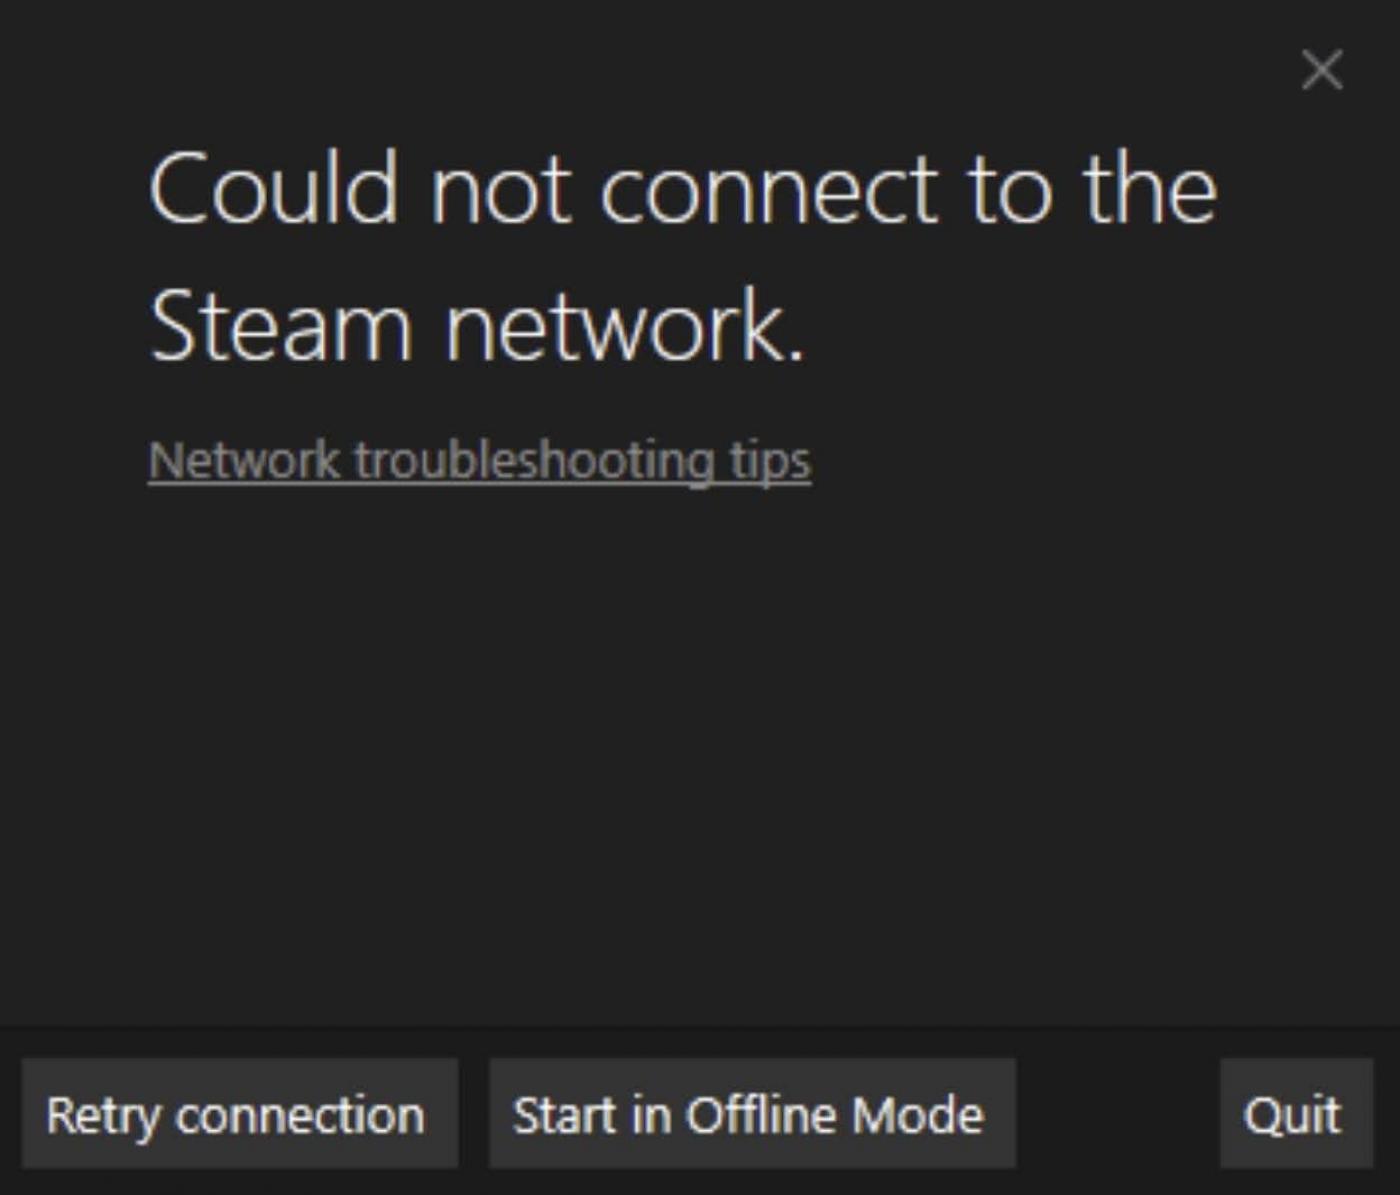 Unable to connect to host. Could not connect to host. Connection Lost.